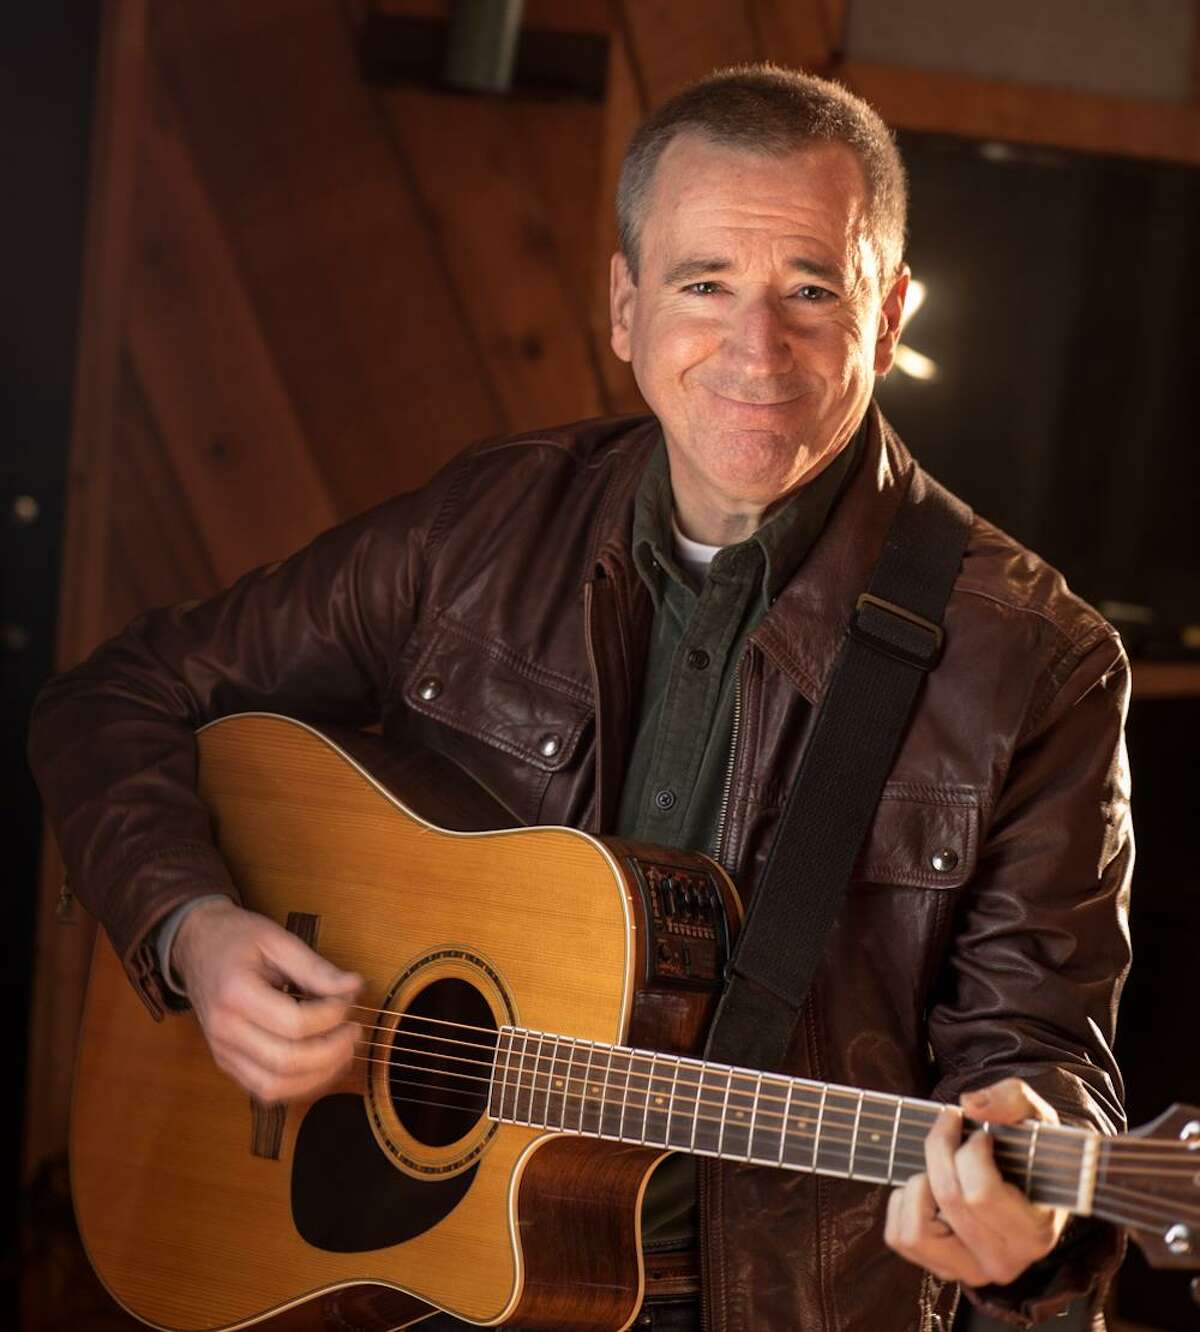 Norwalk singer-songwriter Will Baird shares original songs at Peaches Southern Pub & Juke Joint as part of First Friday celebration on April 6.